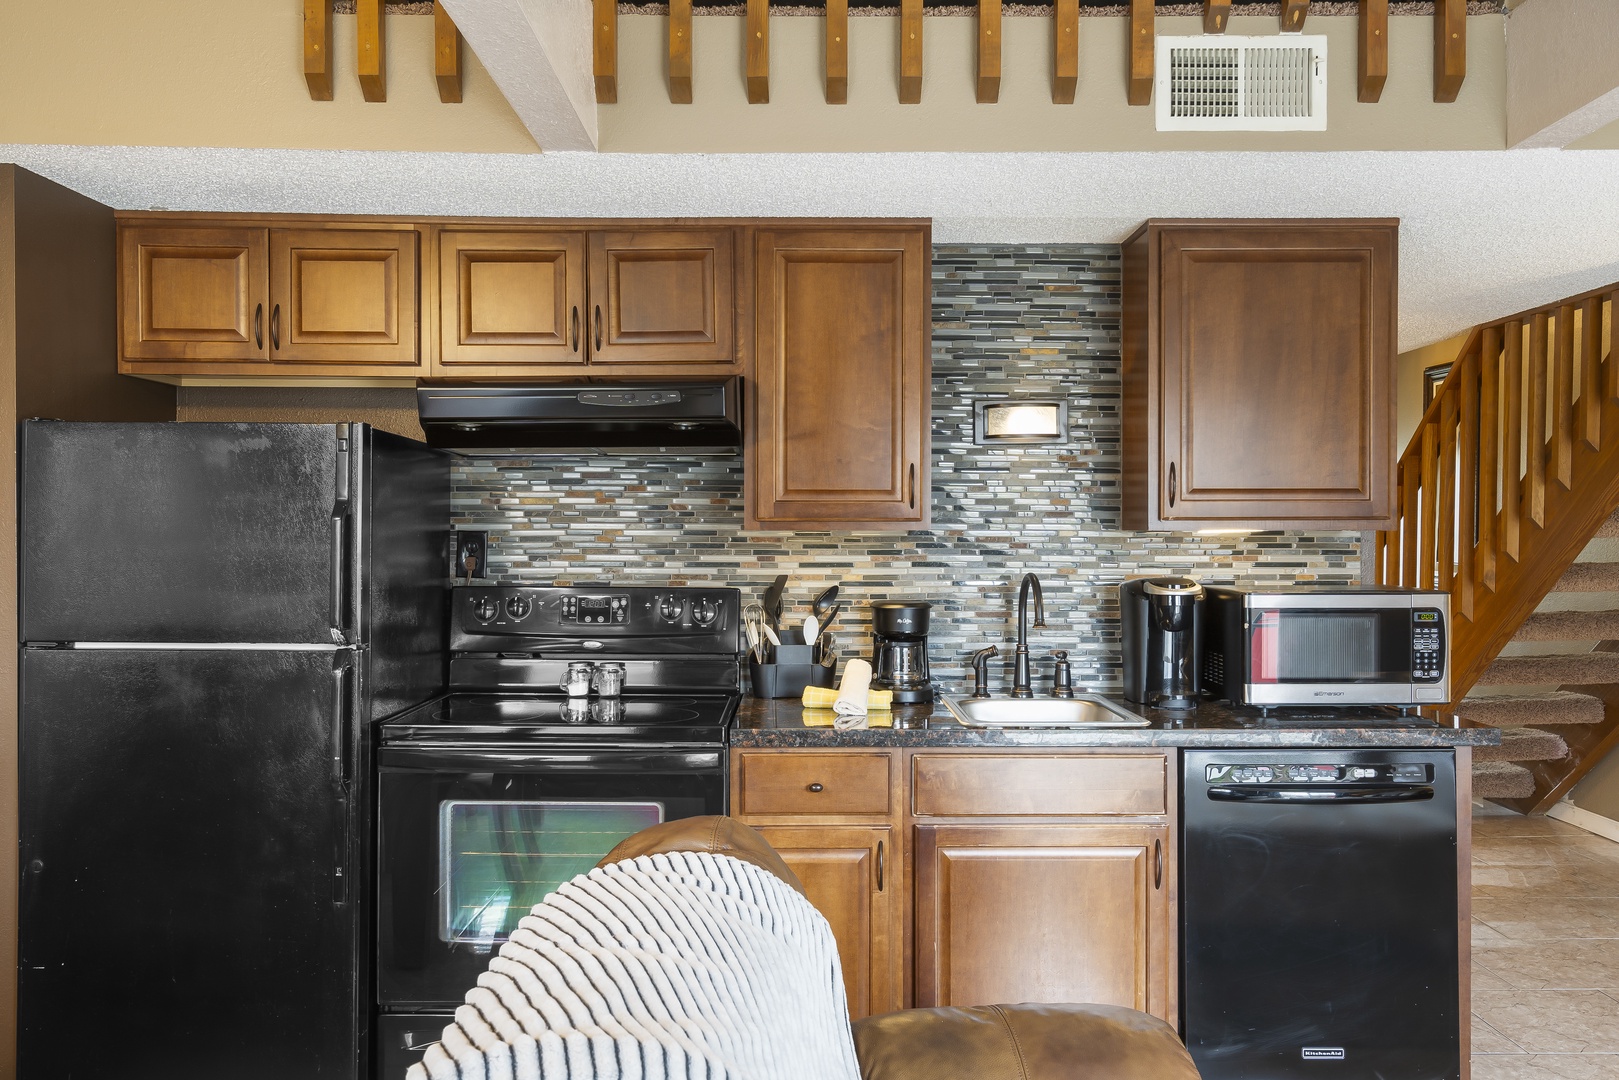 The sleek kitchen area offers ample space & all the comforts of home